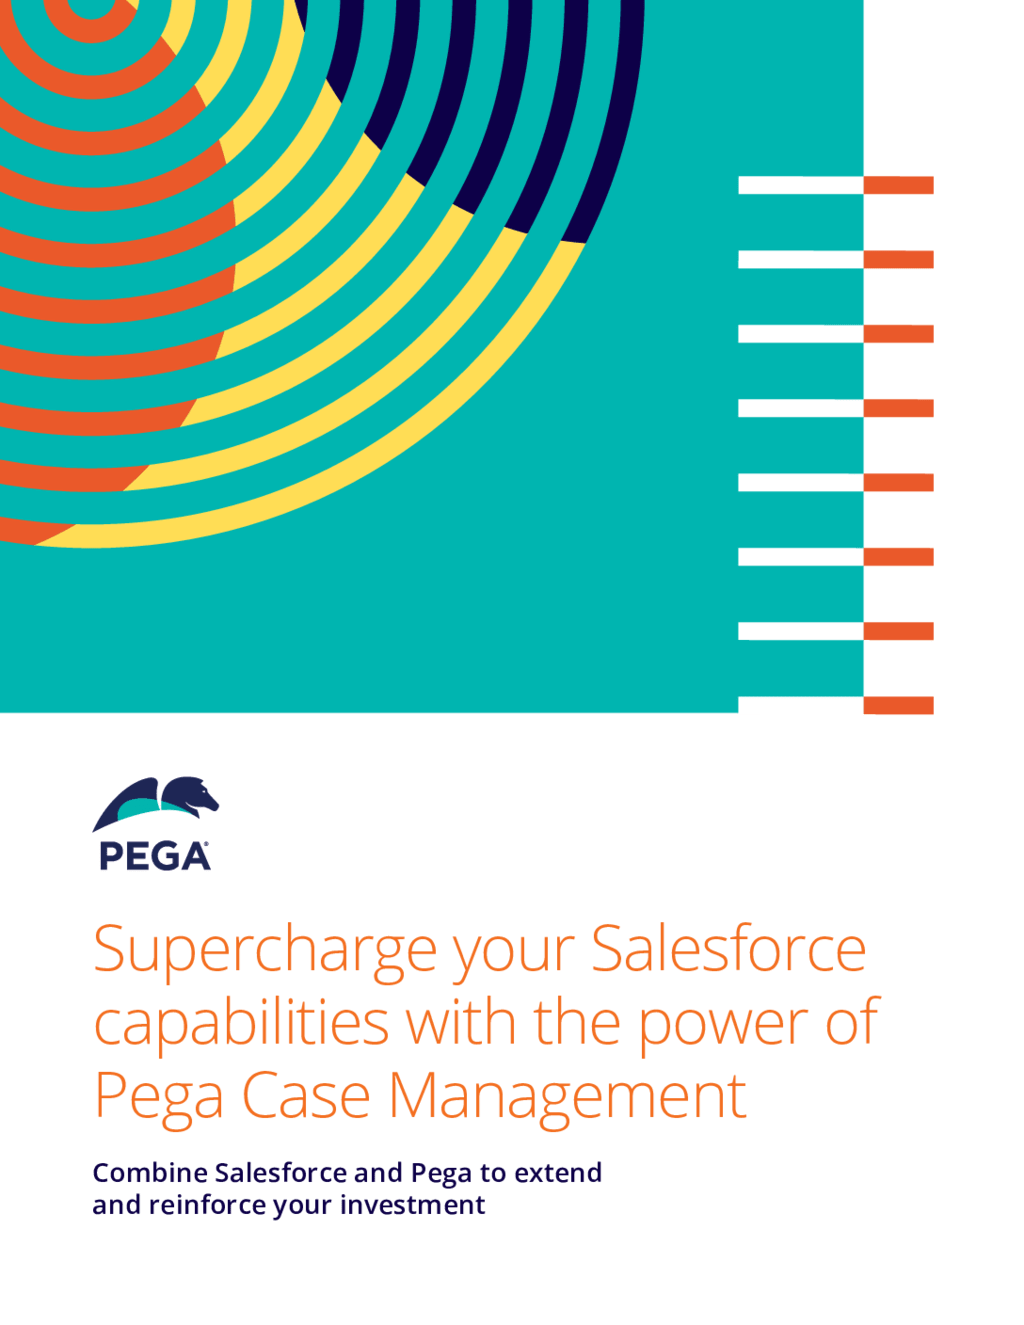 Supercharge your Salesforce capabilities with the power of Pega